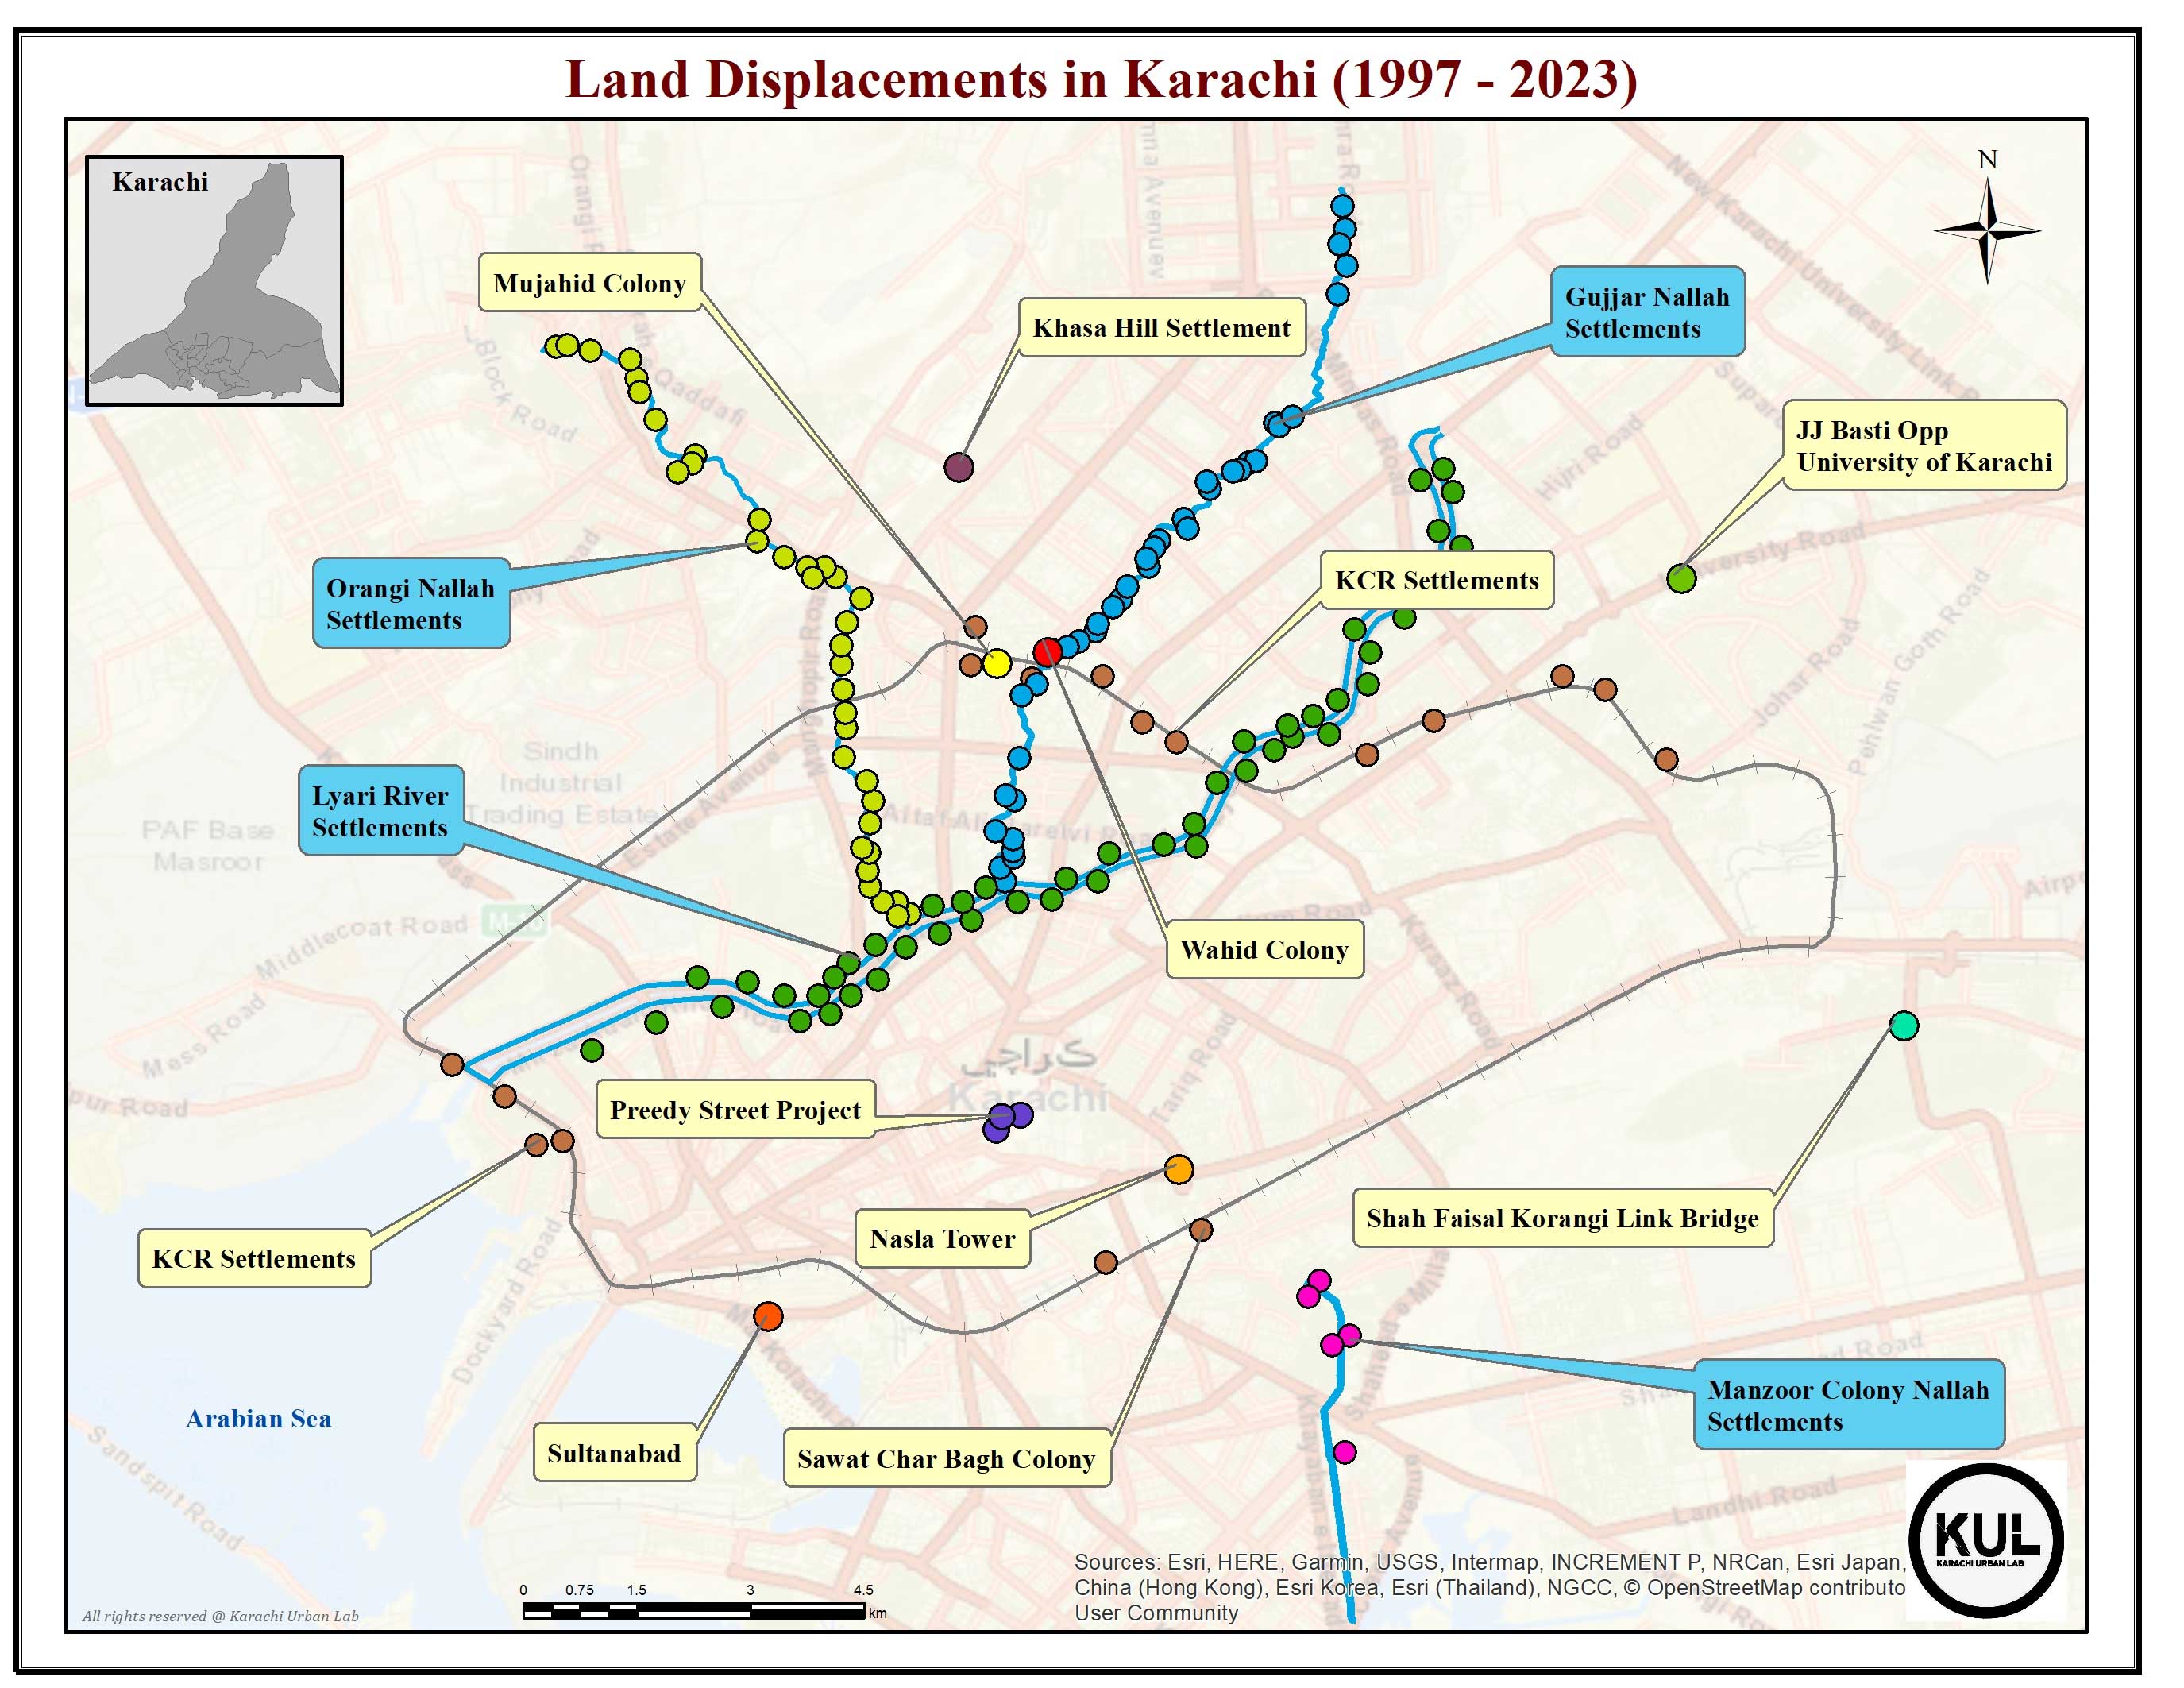 Map depicting land displacements in Karachi from 1997 to 2023. — Muhammad Toheed